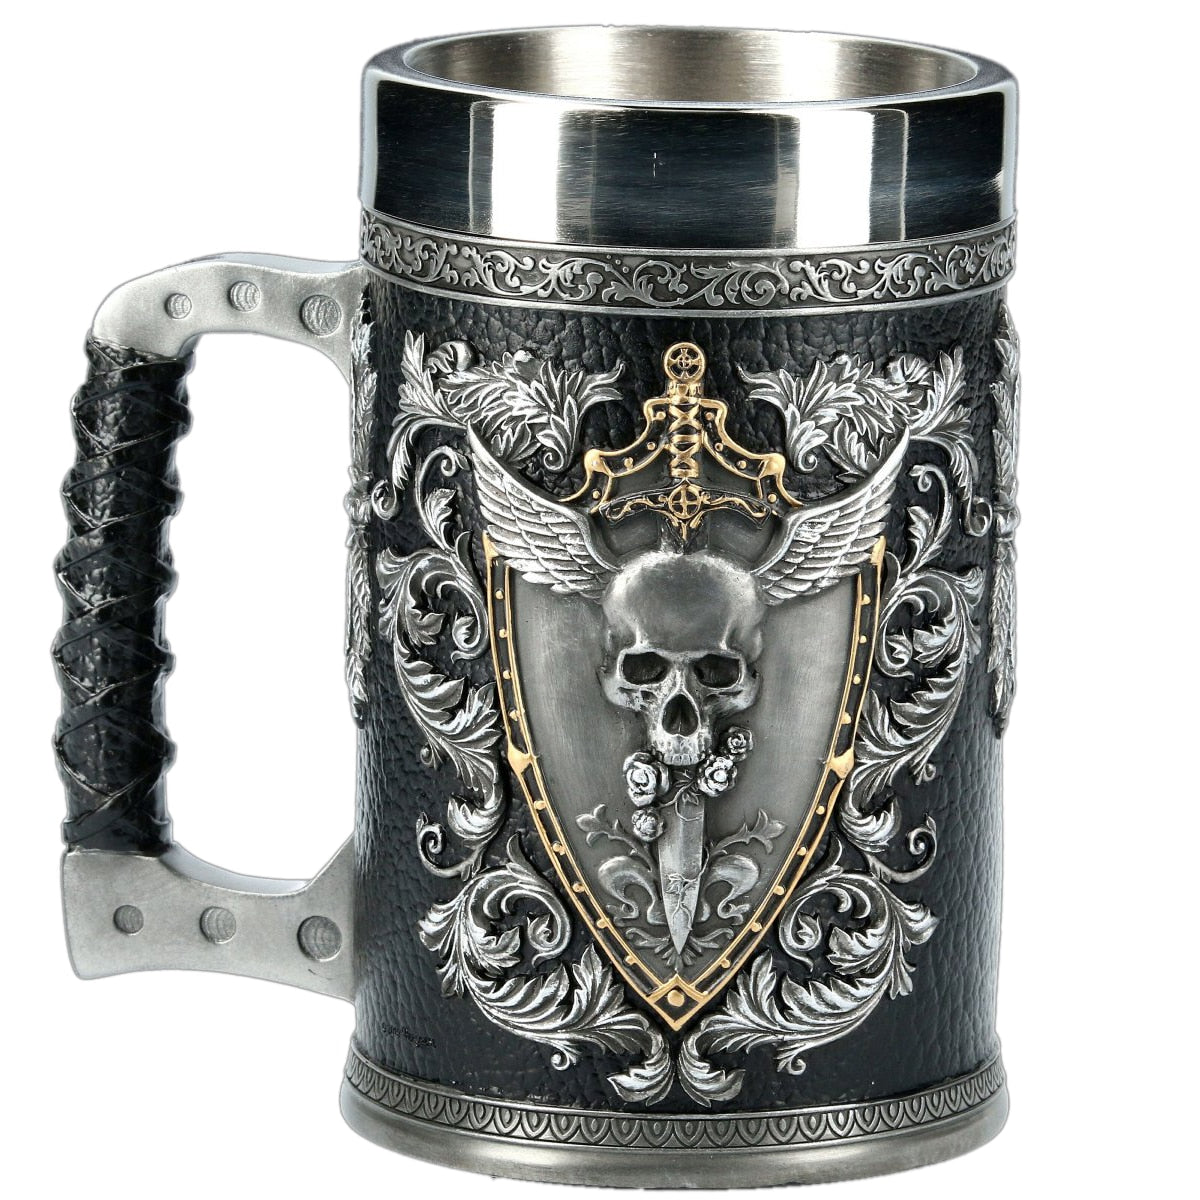 Eagle's Crest medieval beer tankard for parties